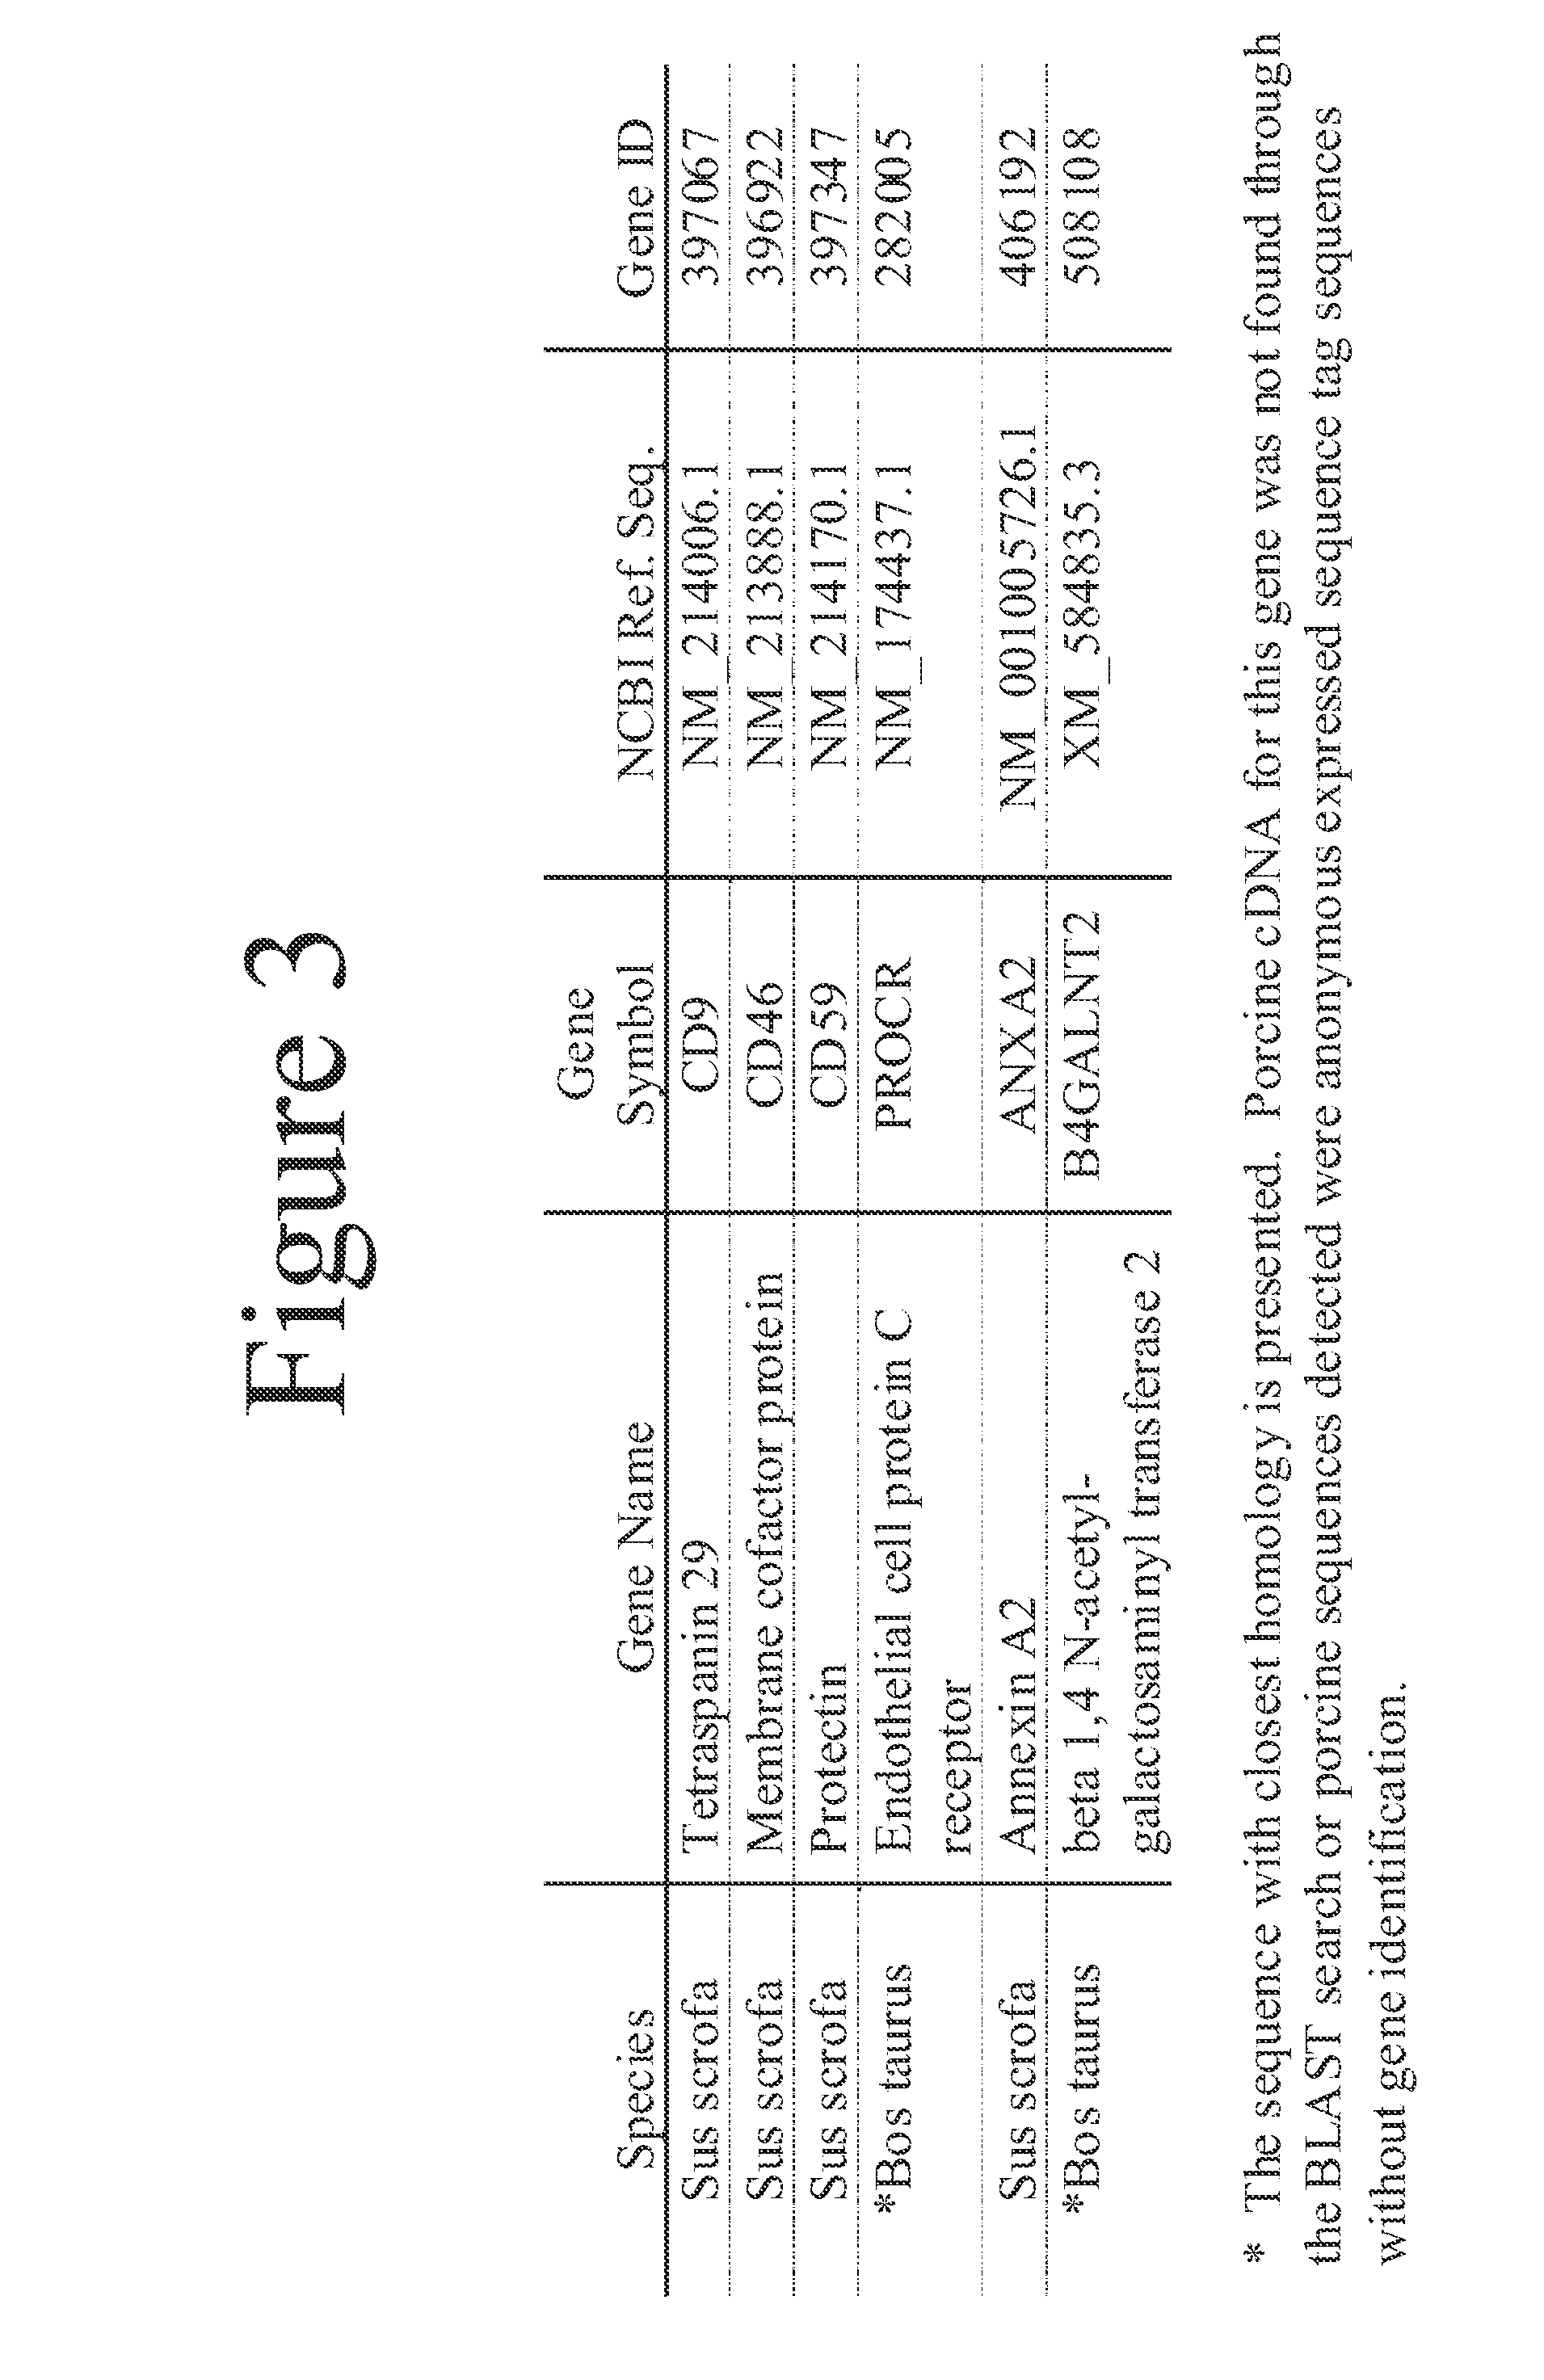 Methods and materials for reducing cardiac xenograft rejection